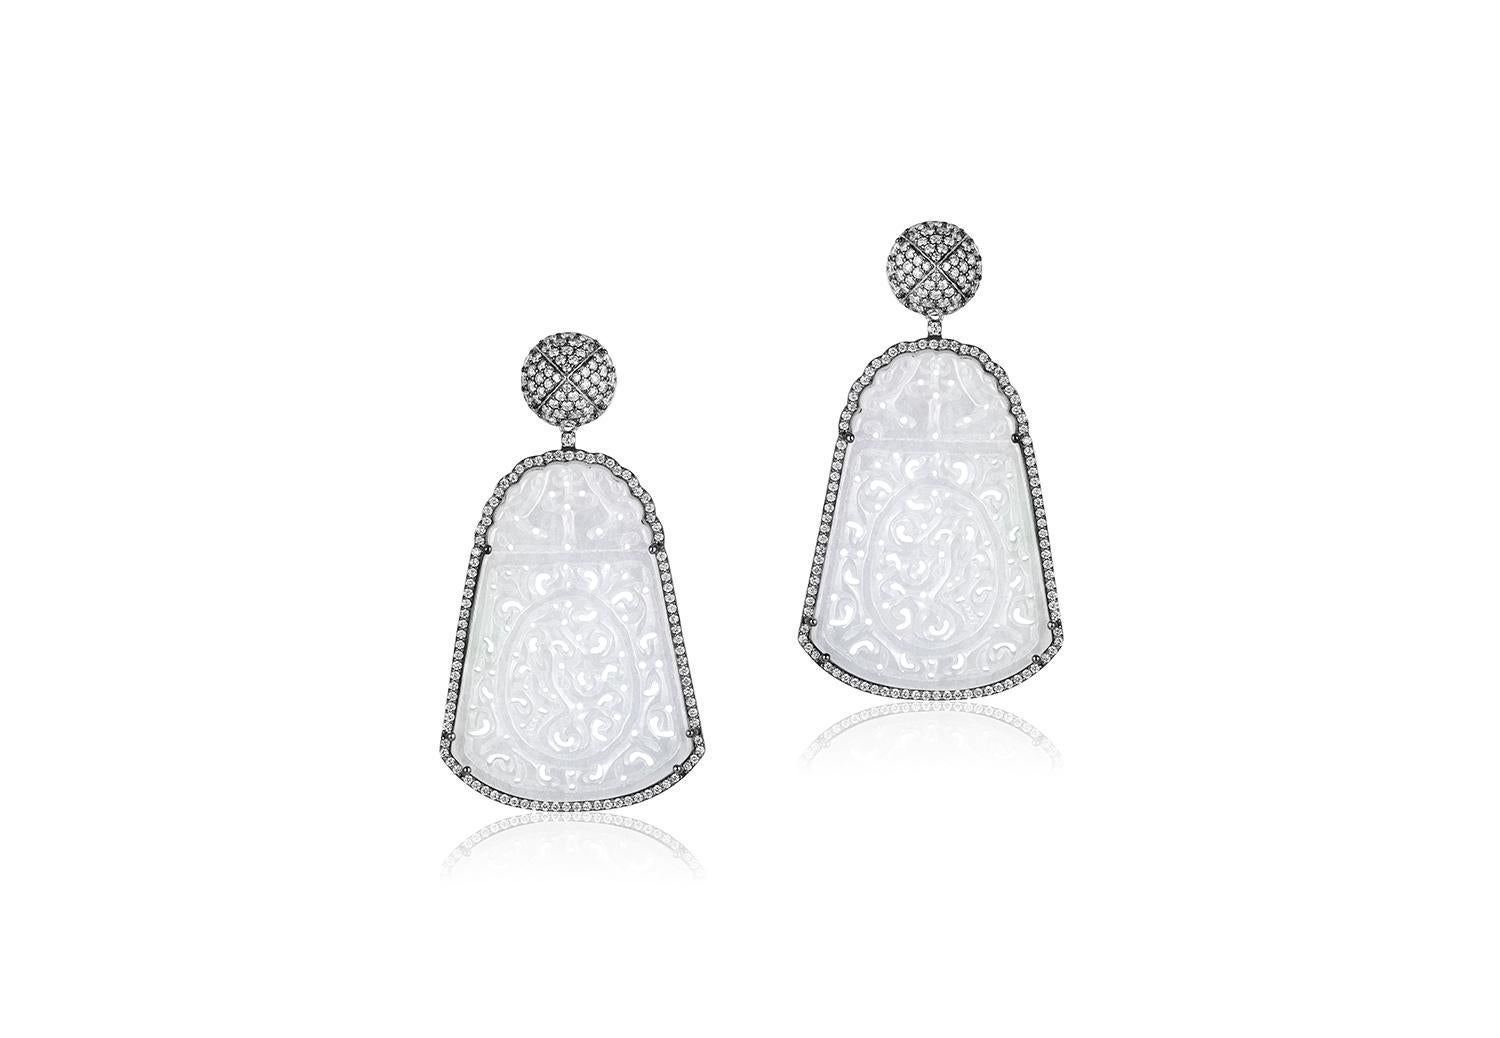 Carved Jade Earrings with Diamonds in 18k White Gold and Black Rhodium, from 'G-One' Collection

Gemstone Weight: 77.08 Carats

Diamond: G-H / VS, Approx Wt: 3.59 Carats